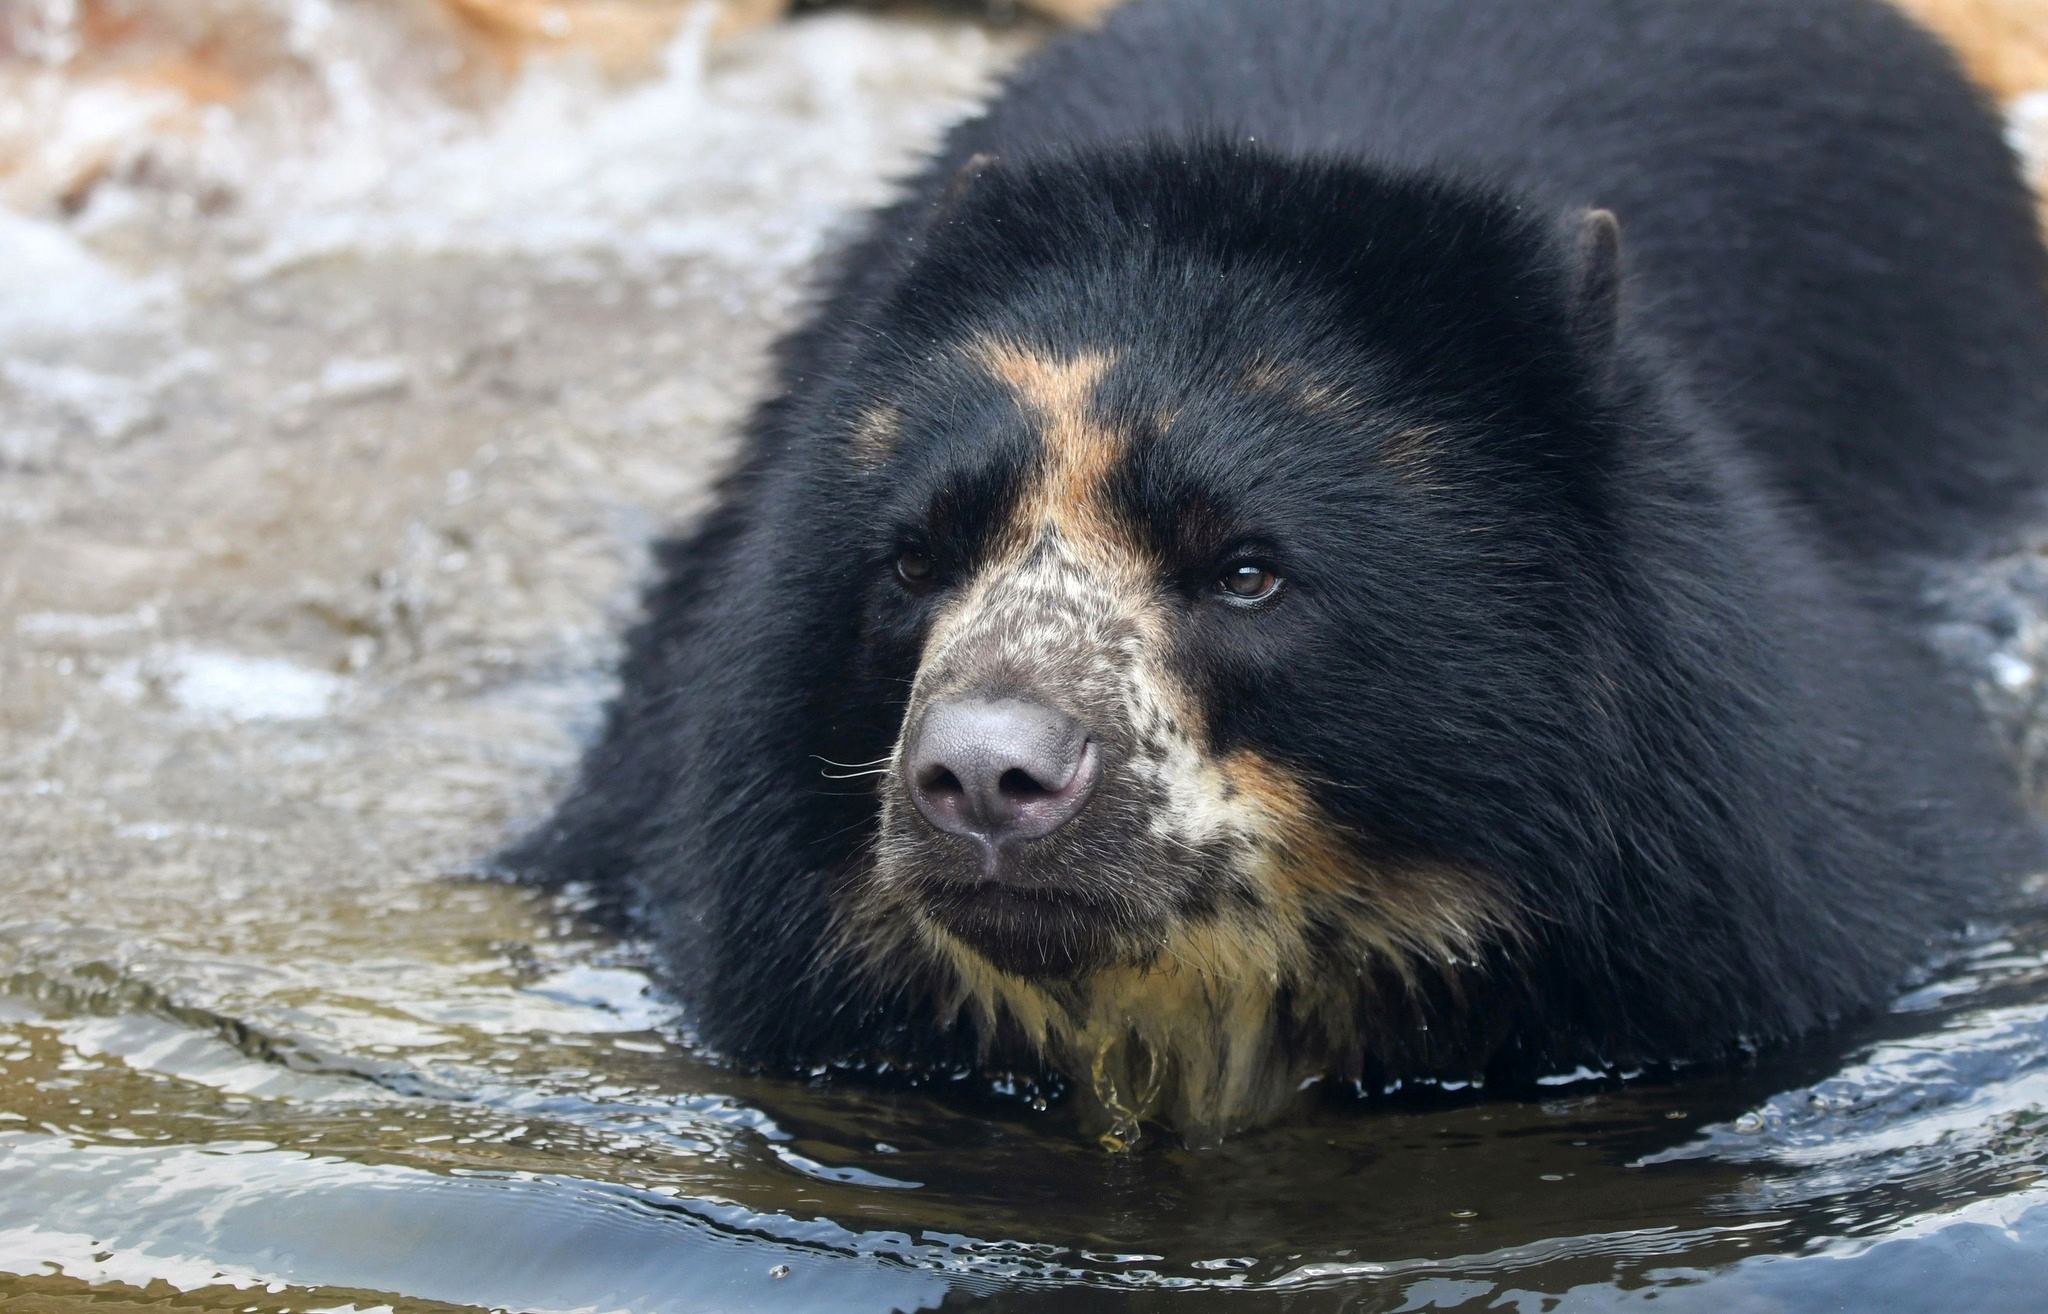 PHOTO: The Andean bear named Ben is shown at the St. Louis Zoo in this undated file photo.